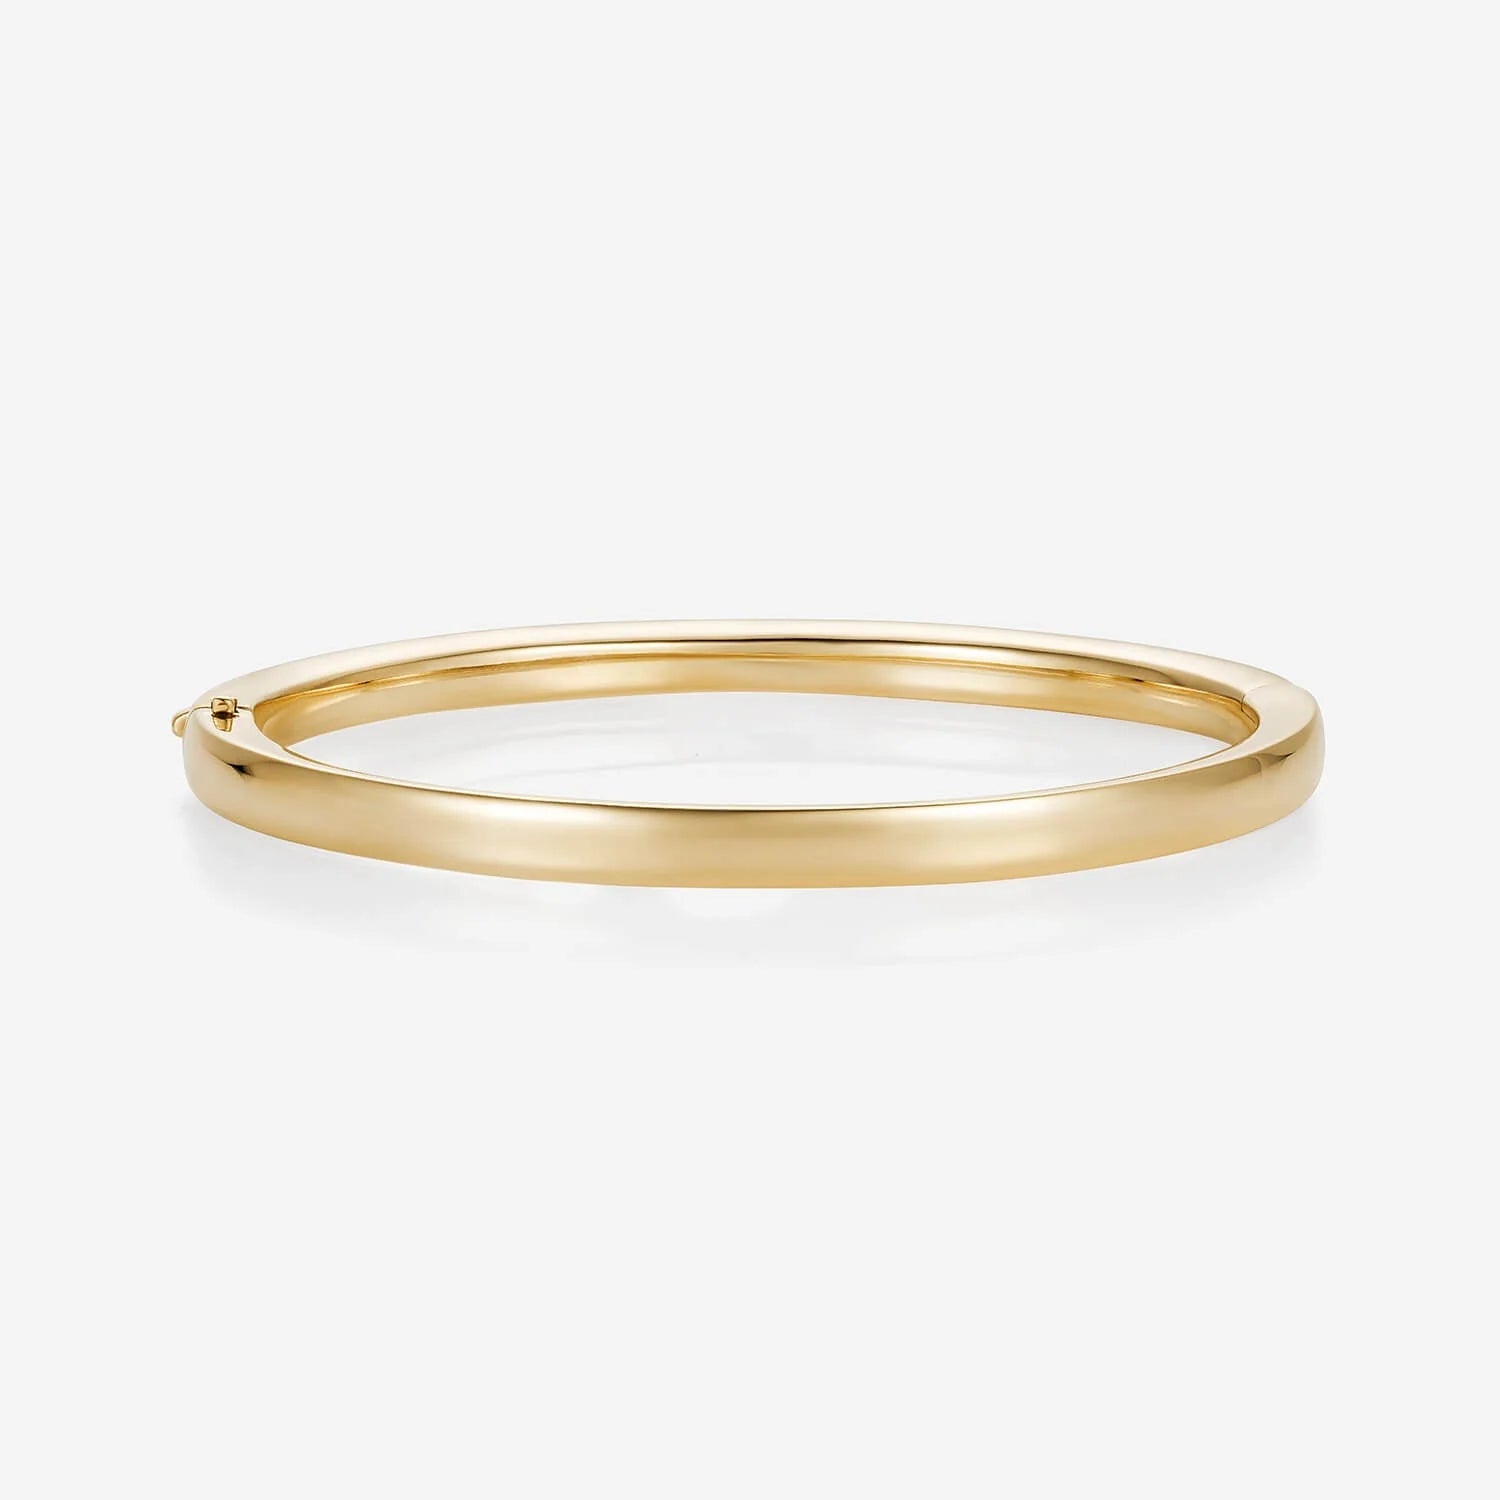 886 Bangle Bracelet in 18ct Yellow Gold